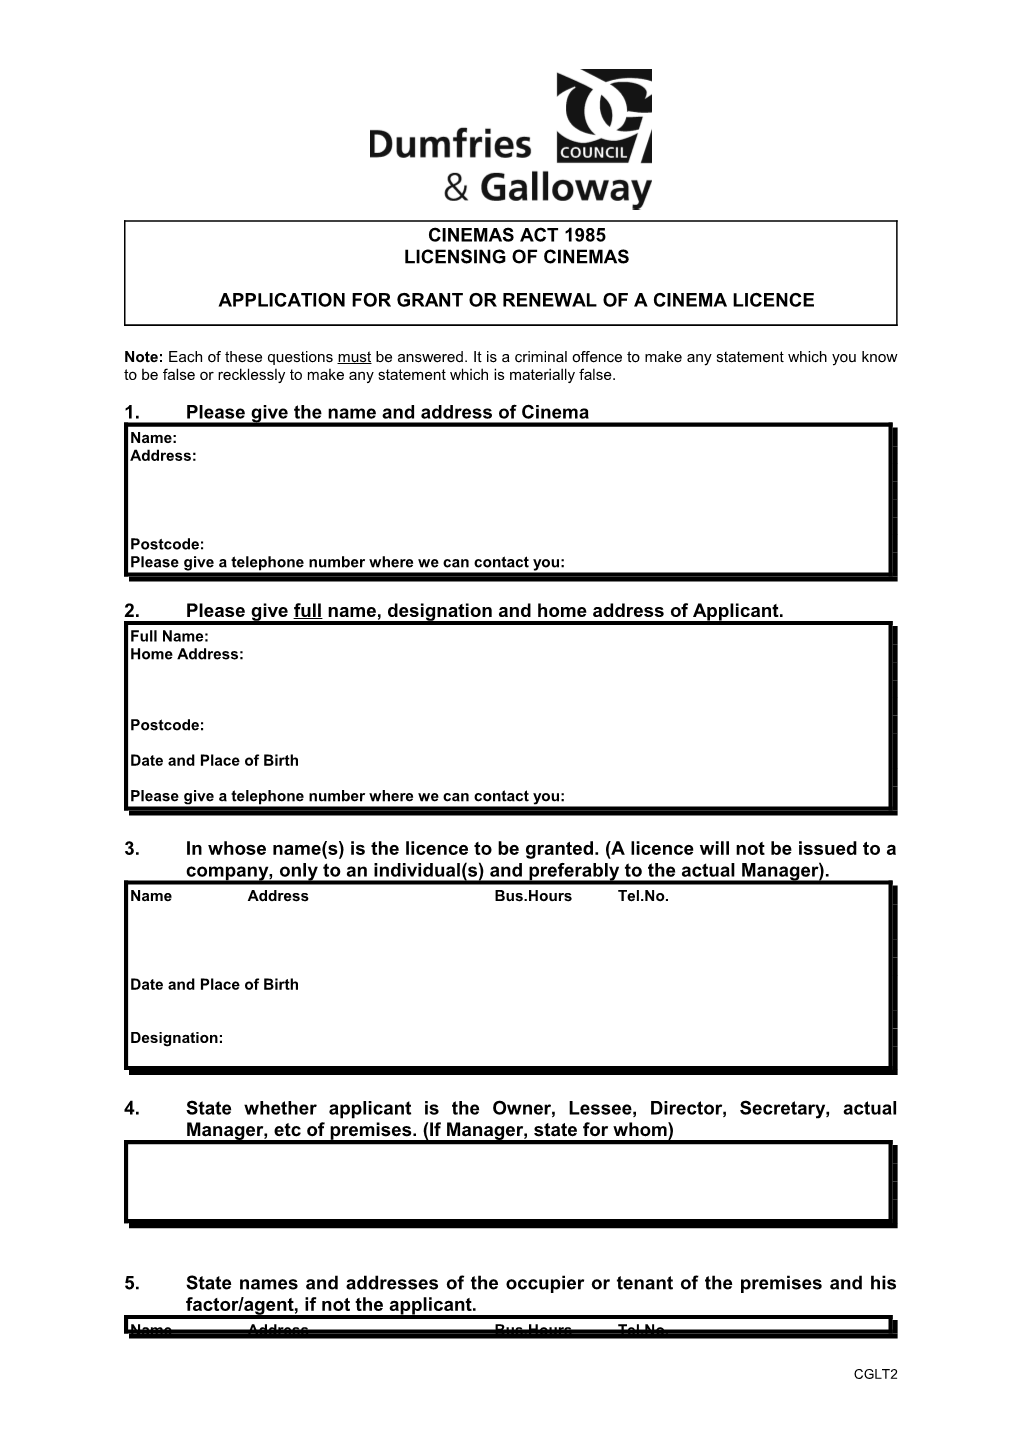 Application for Grant Or Renewal of a Cinema Licence